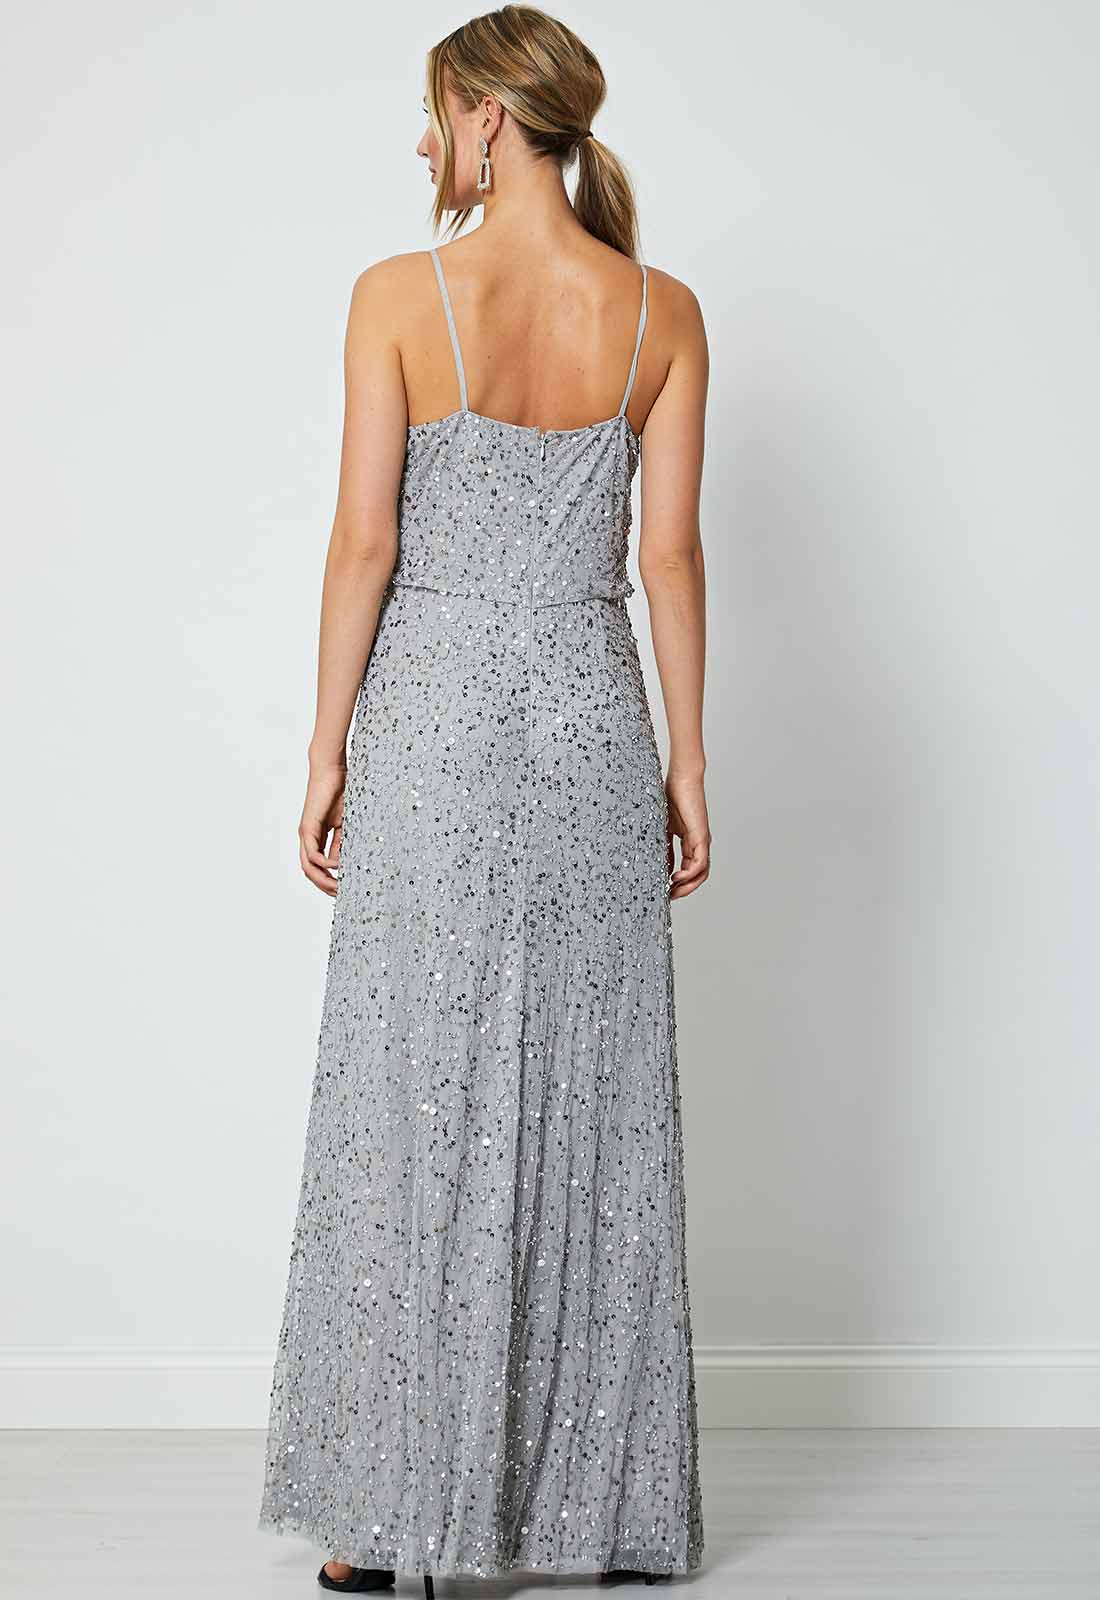 ANGELEYE Silver Lucy Embellished Maxi Dress-73689